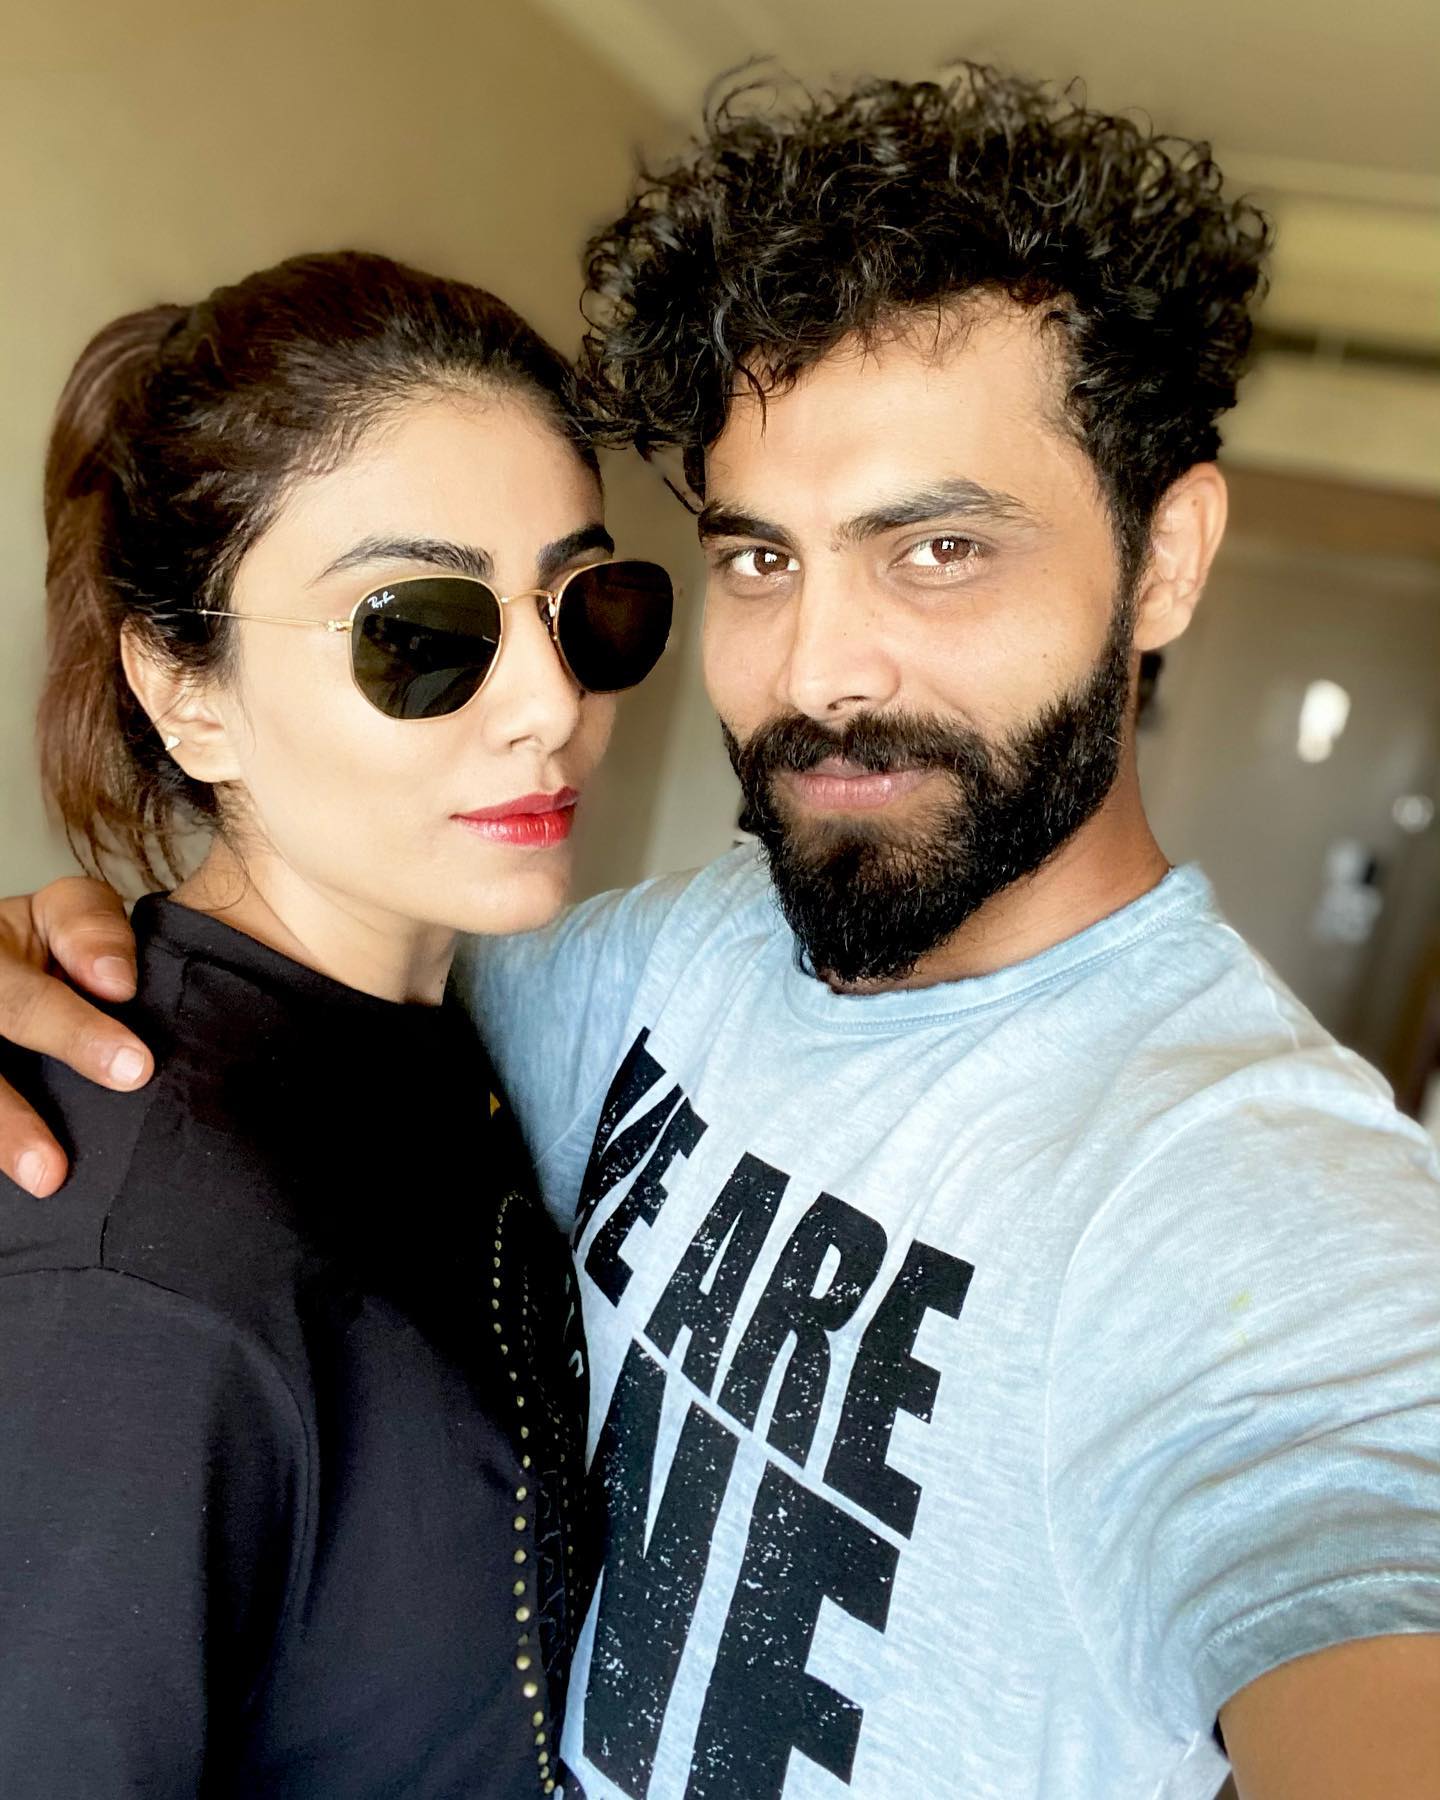 131028684 131995408566191 8901733308773487924 n Ravindra Jadeja's wife Riva Solanki is the daughter of a millionaire father, son-in-law was gifted an Audi of 1 crore even before marriage